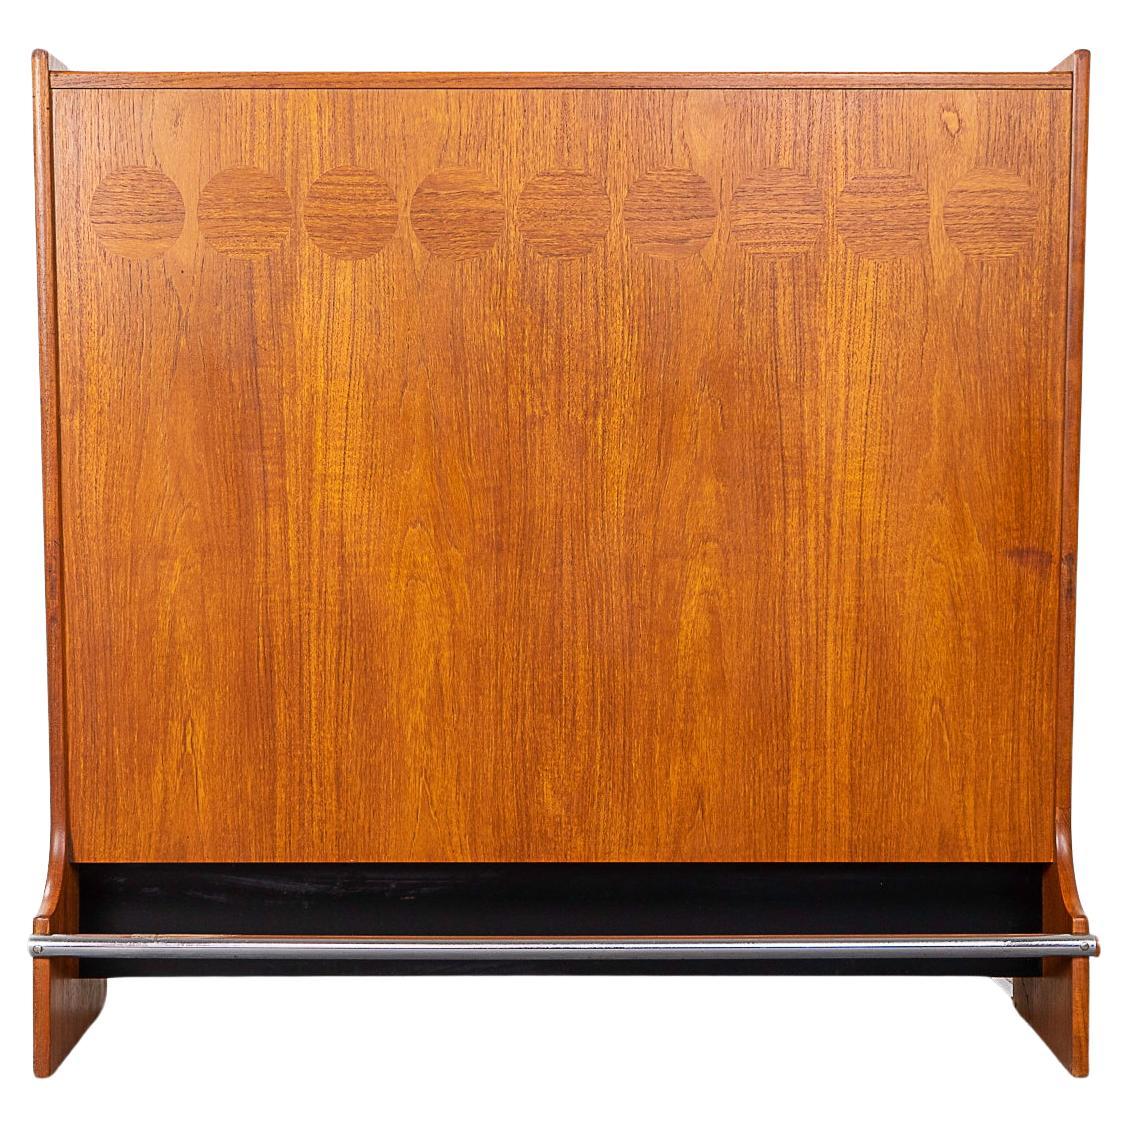 Teak Danish cocktail bar by Johannes Andersen for Skaaning & son, circa 1960's. Very handsome freestanding design with beautiful cross grained elliptical marquetry, sculpted door pulls and a chromed steel foot rest. Upper section flips & drops open